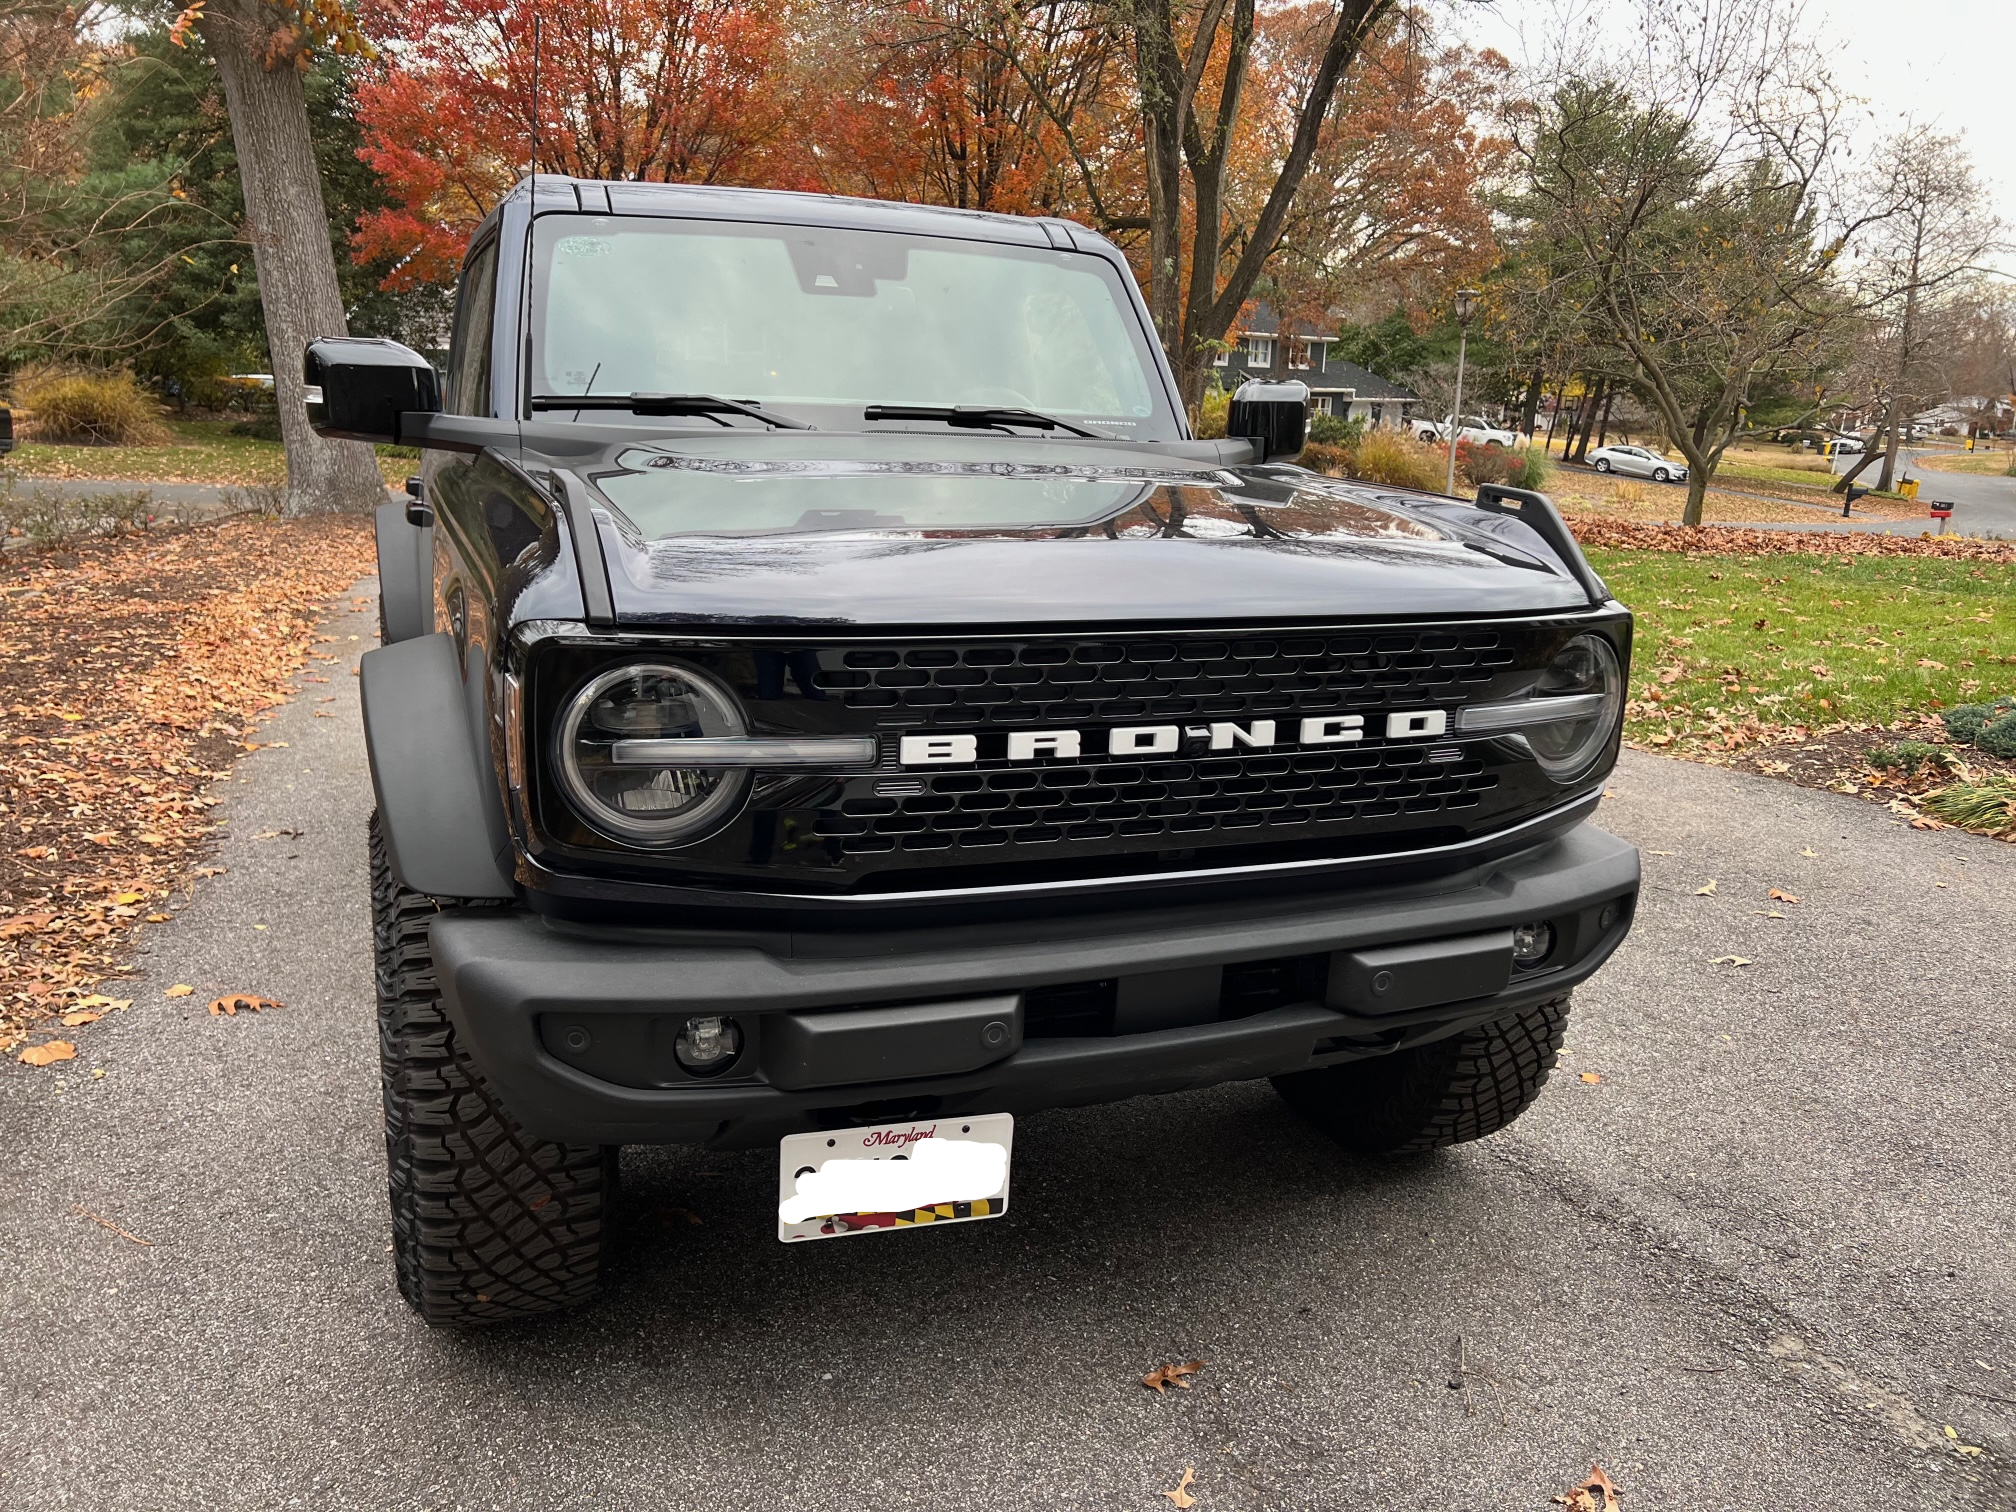 Ford Bronco Up-Close Pics: 2022 Capable Front Bumper License plate